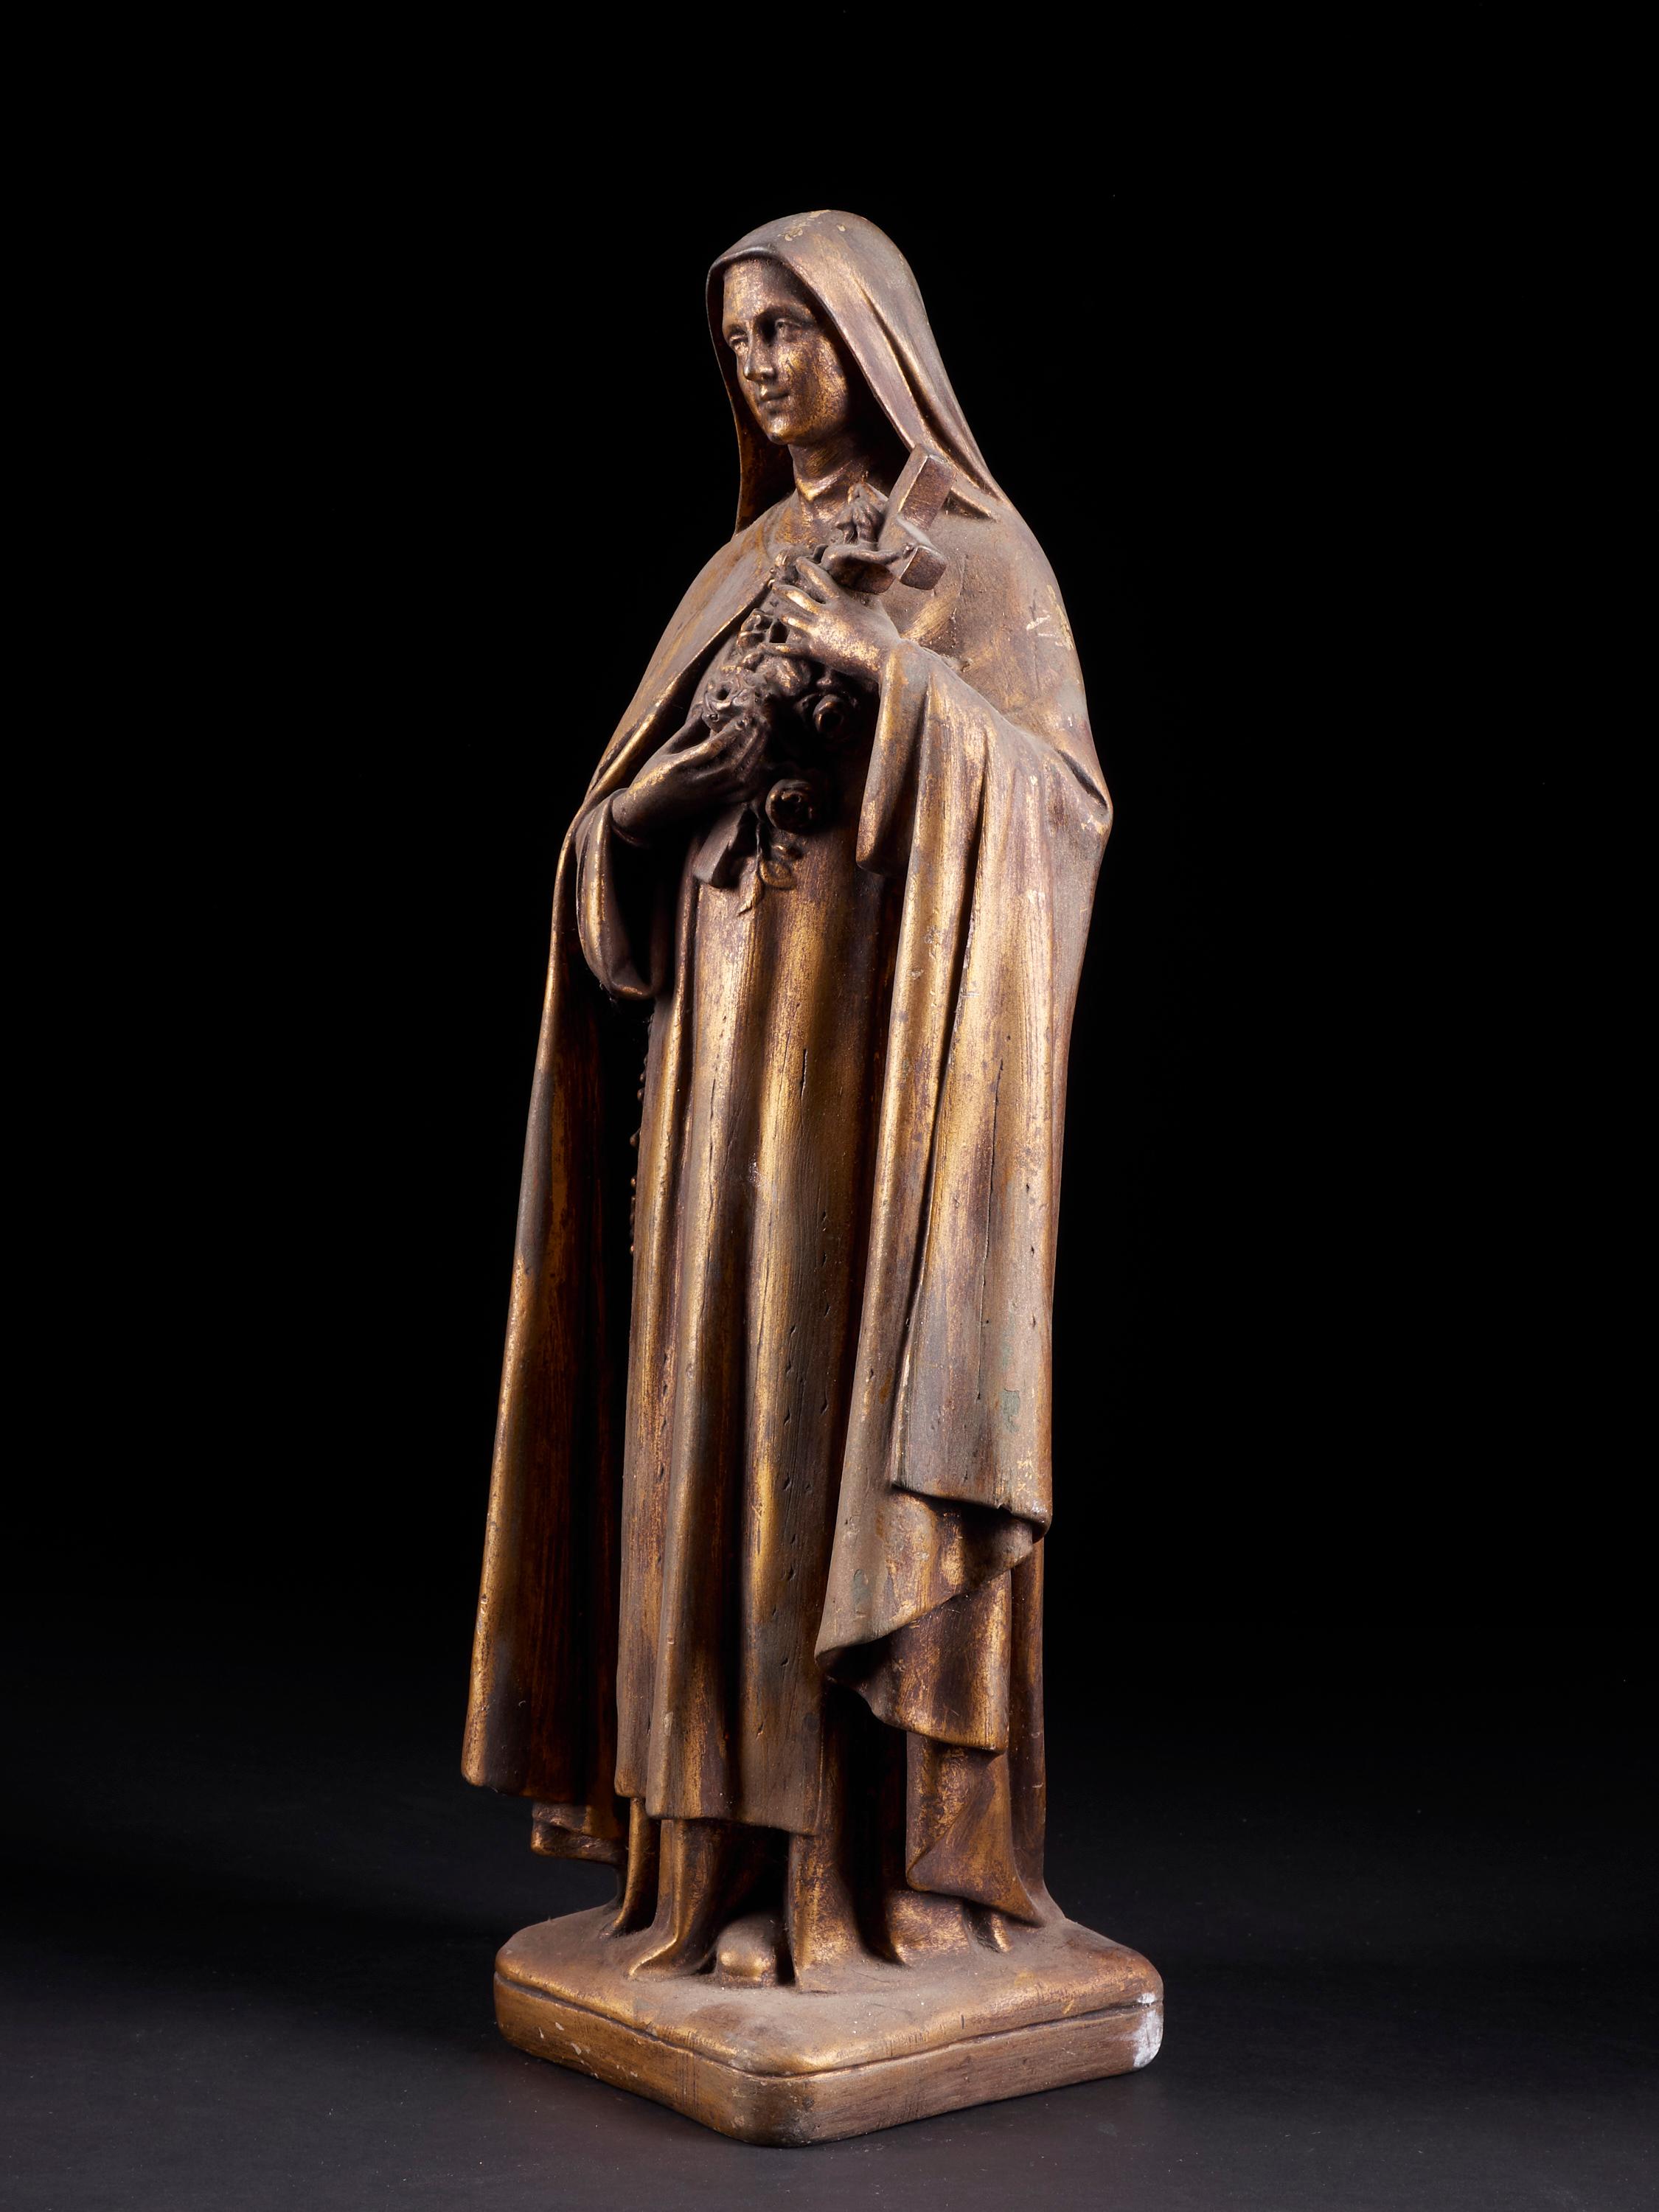 Beautiful statue depicting Sainte-Thérèse of Lisieux carrying the dead body of the Christ on a cross. Statue made of plaster.

